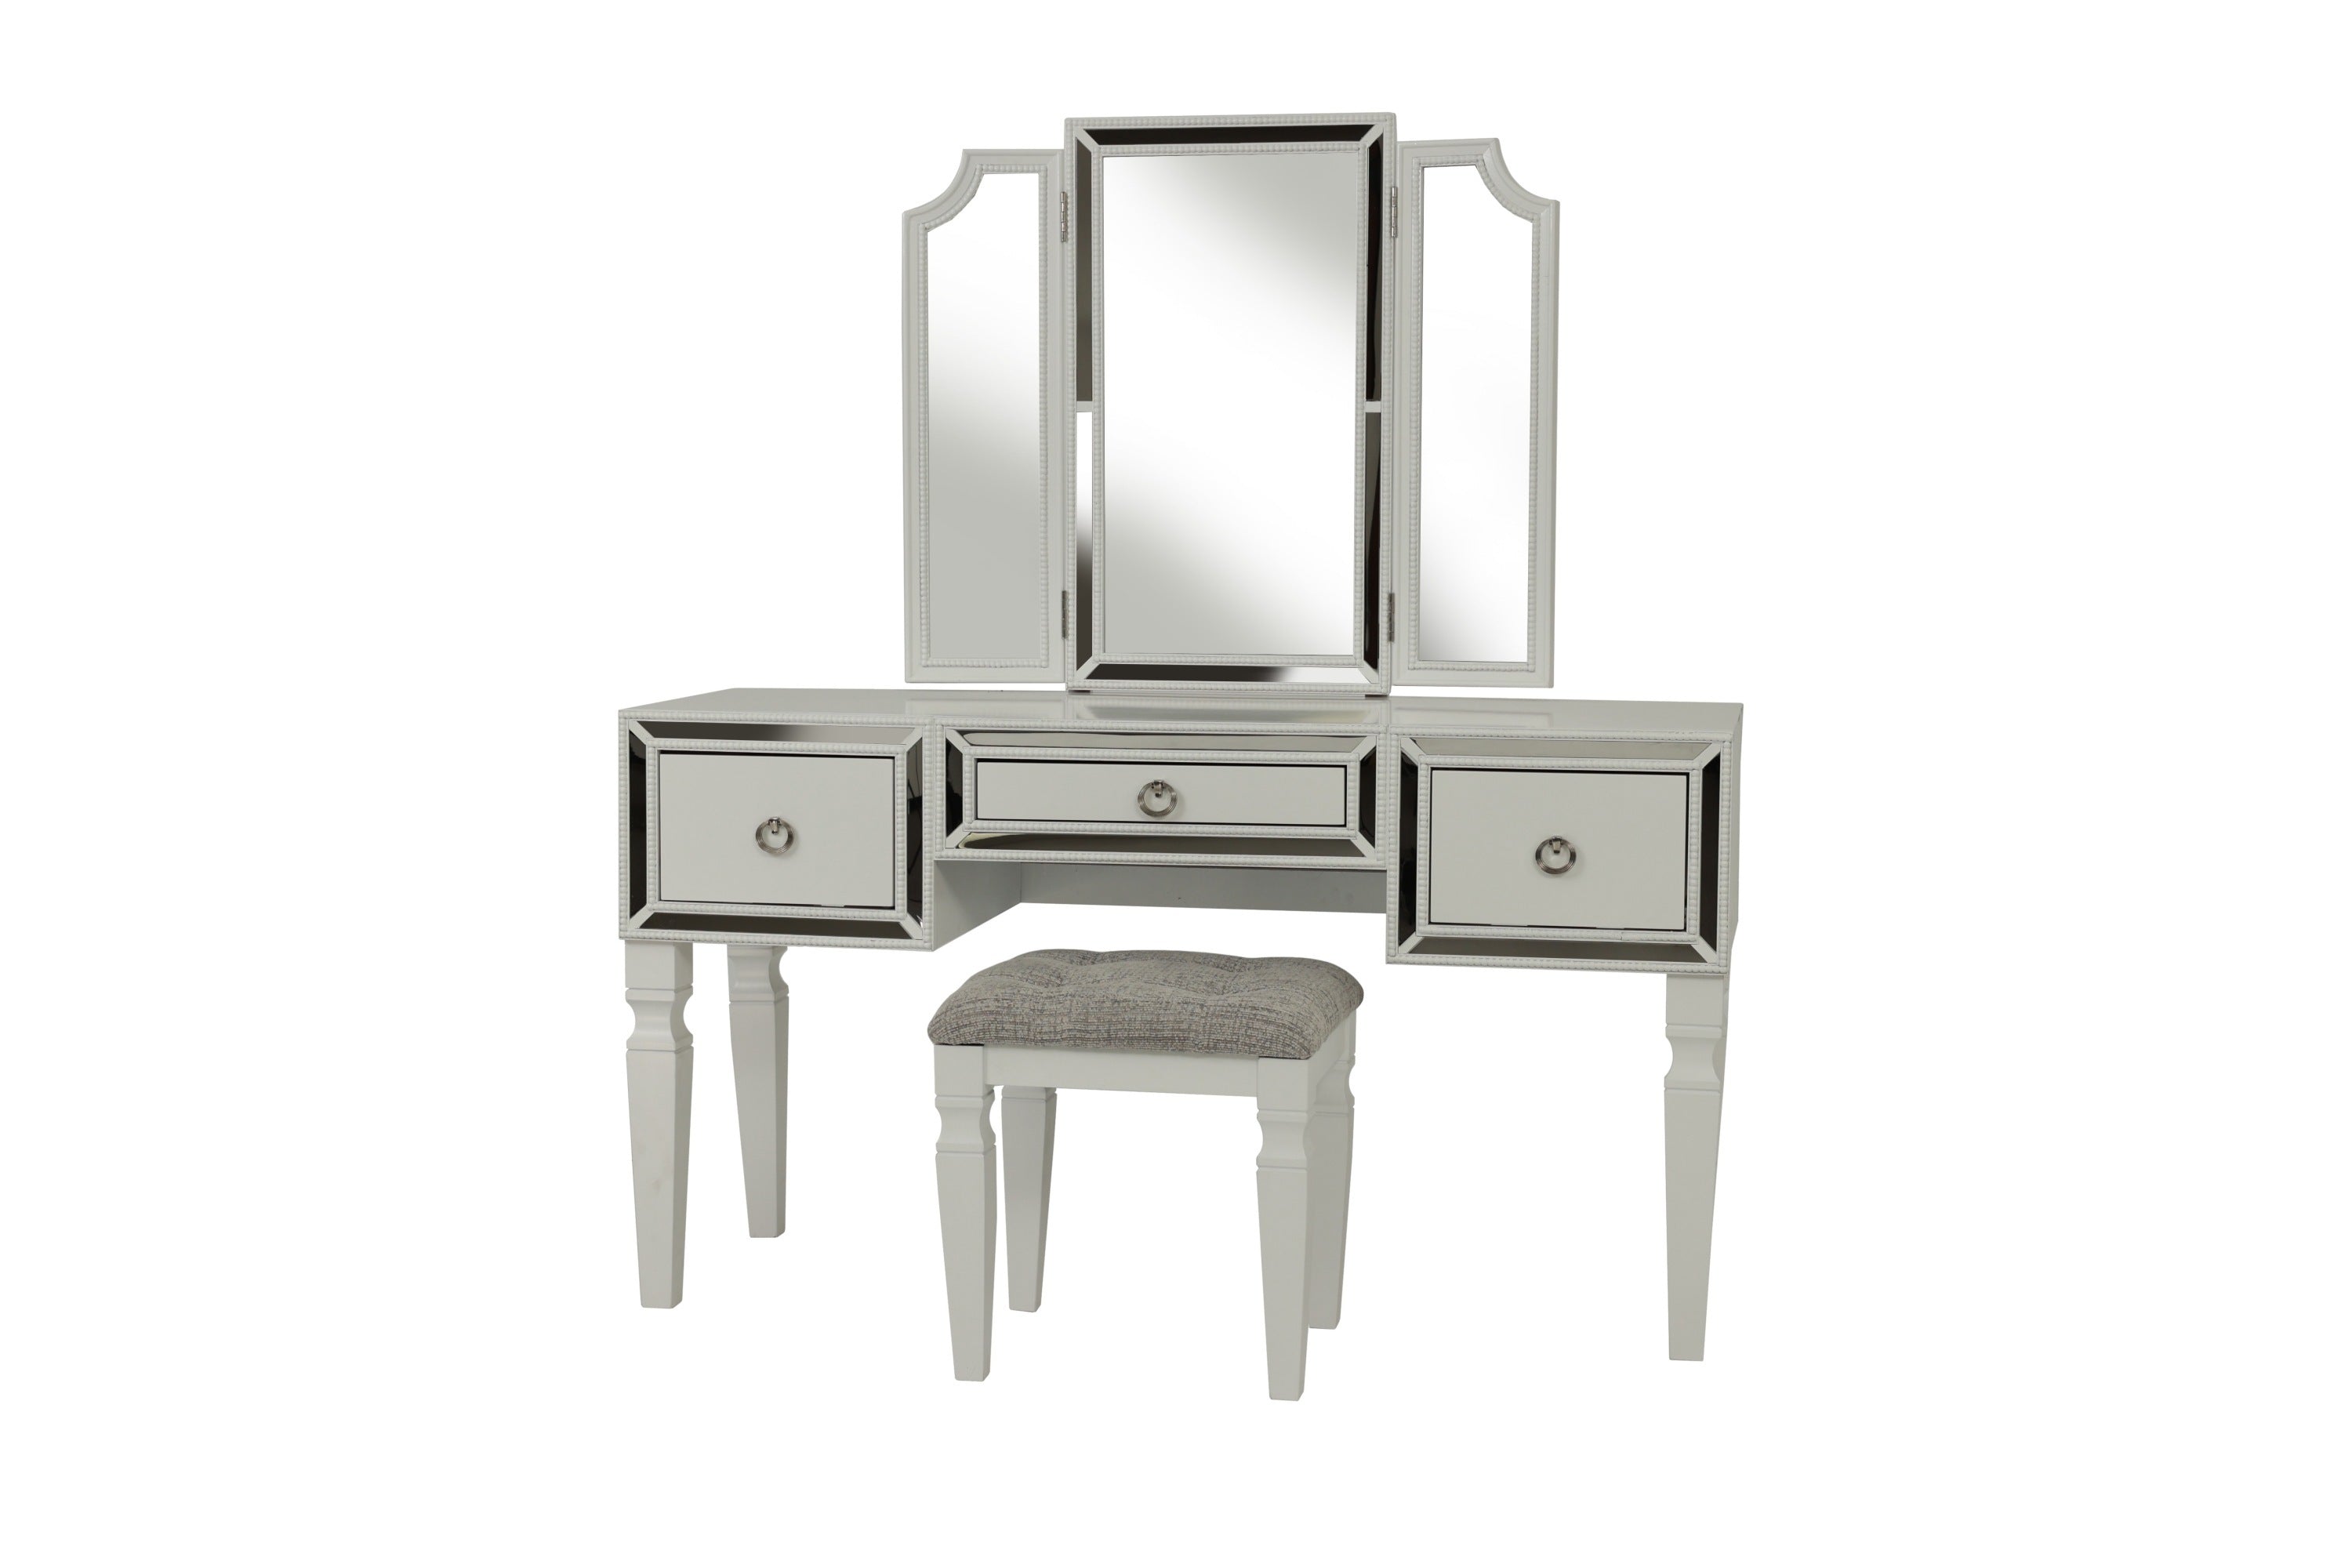 Luxurious Majestic Classic White Color Vanity Set w Stool 3-Storage Drawers 1pc Bedroom Furniture Set Tri-Fold Mirror